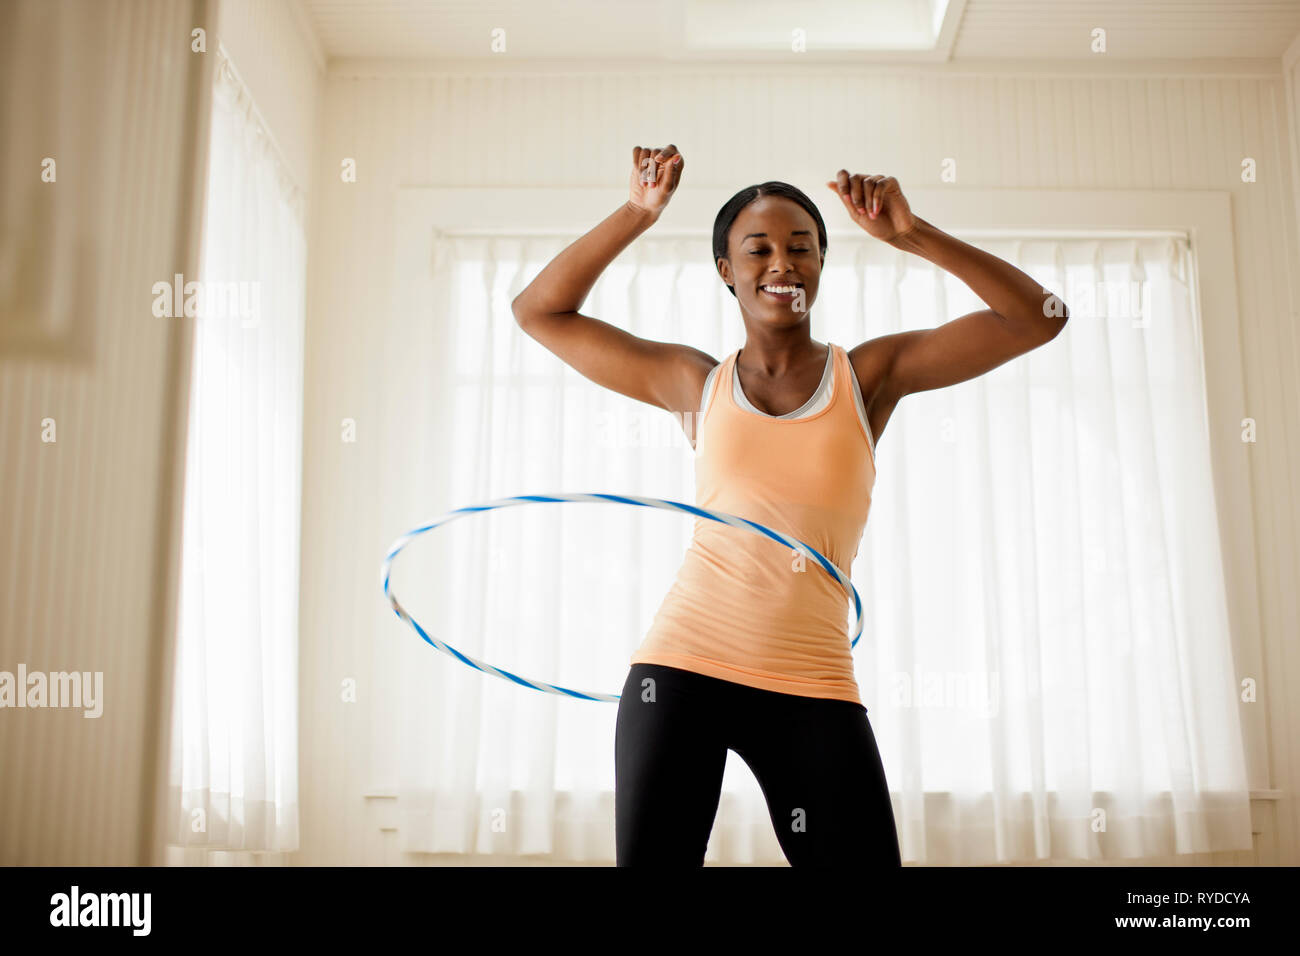 Happy young woman hula hooping in her living room. Stock Photo